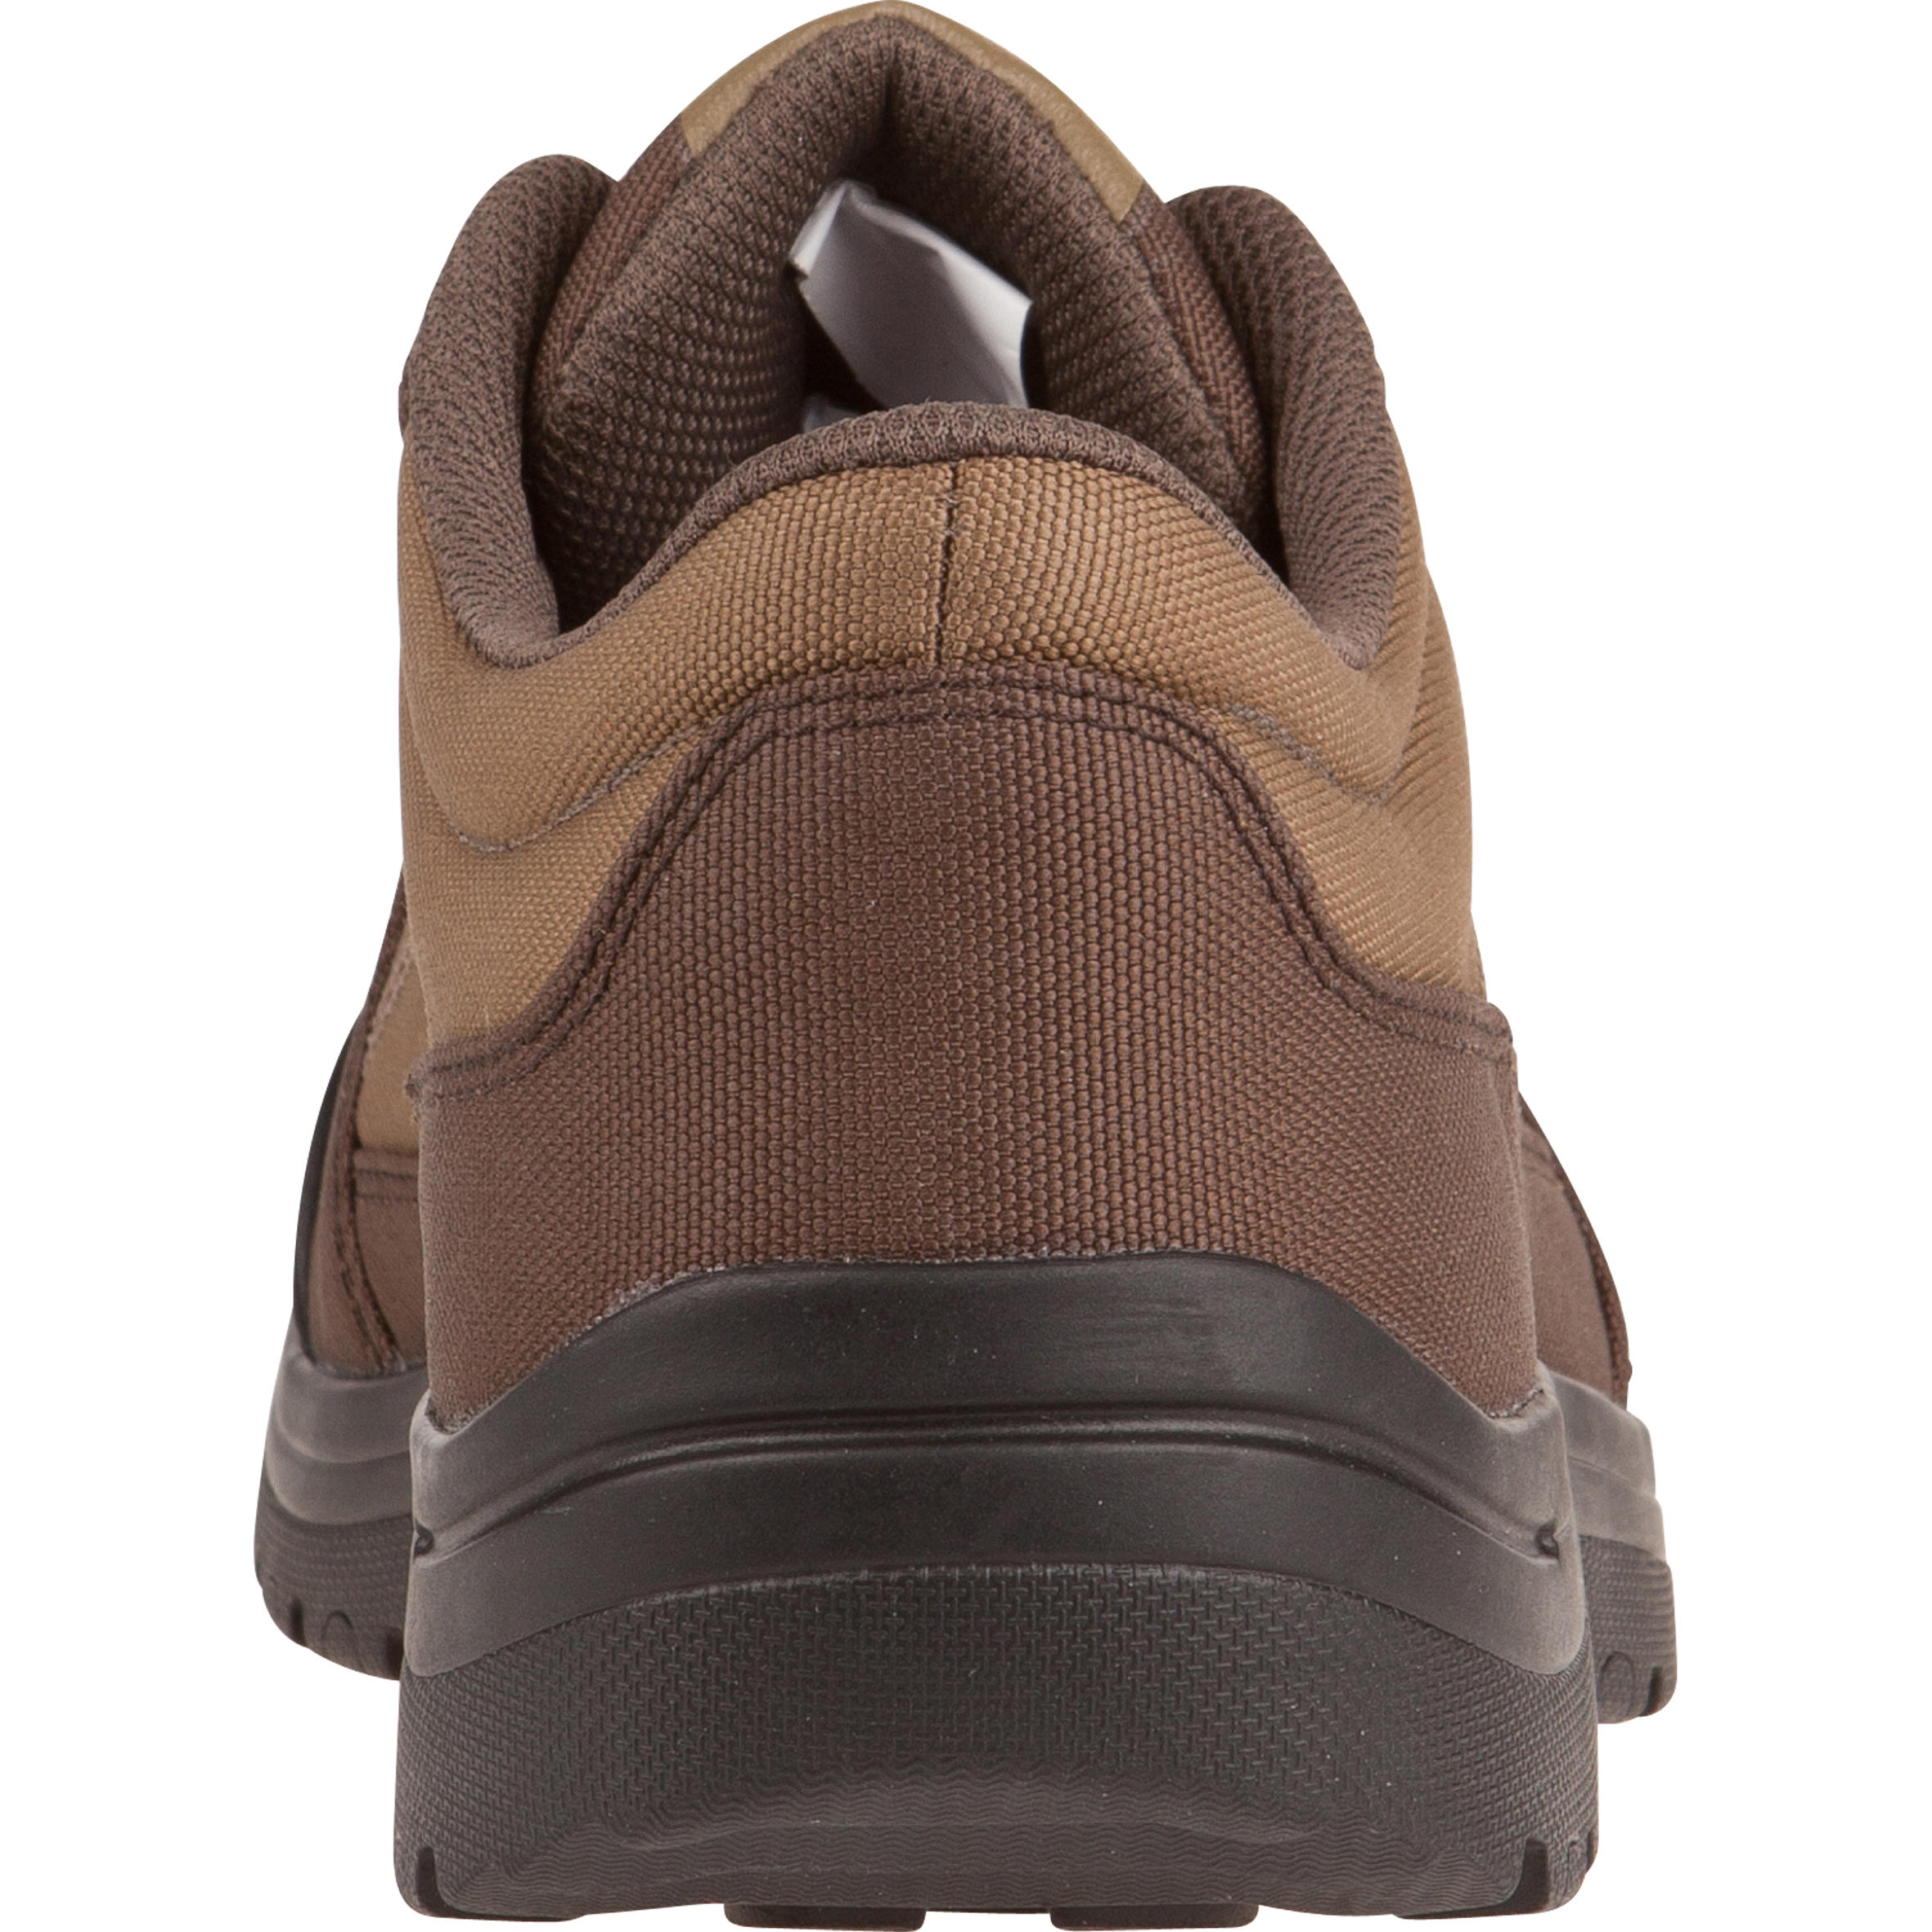 Light Shoes - Brown 3/8